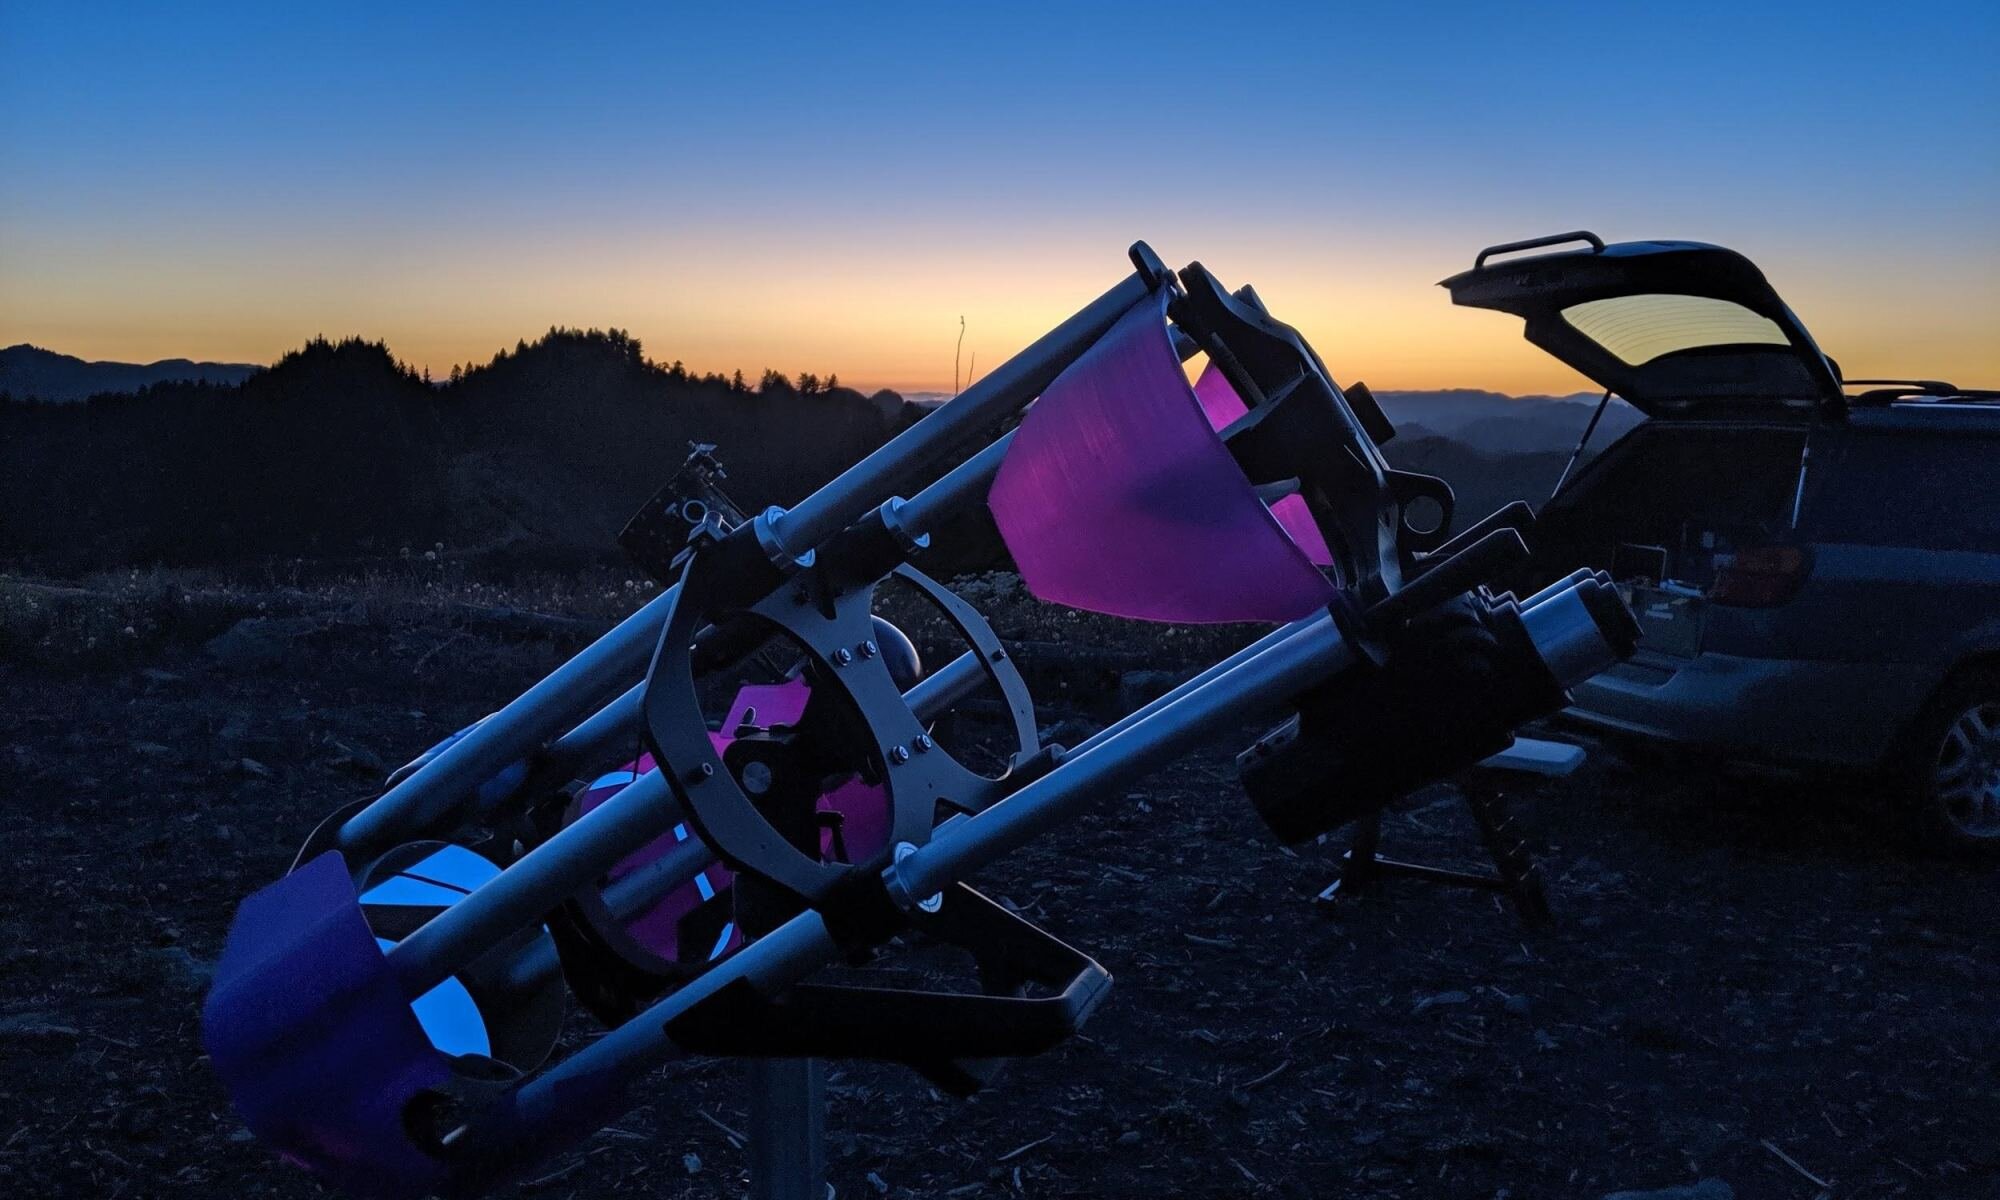 A 3-D printed telescope The analog sky drifter photo pic